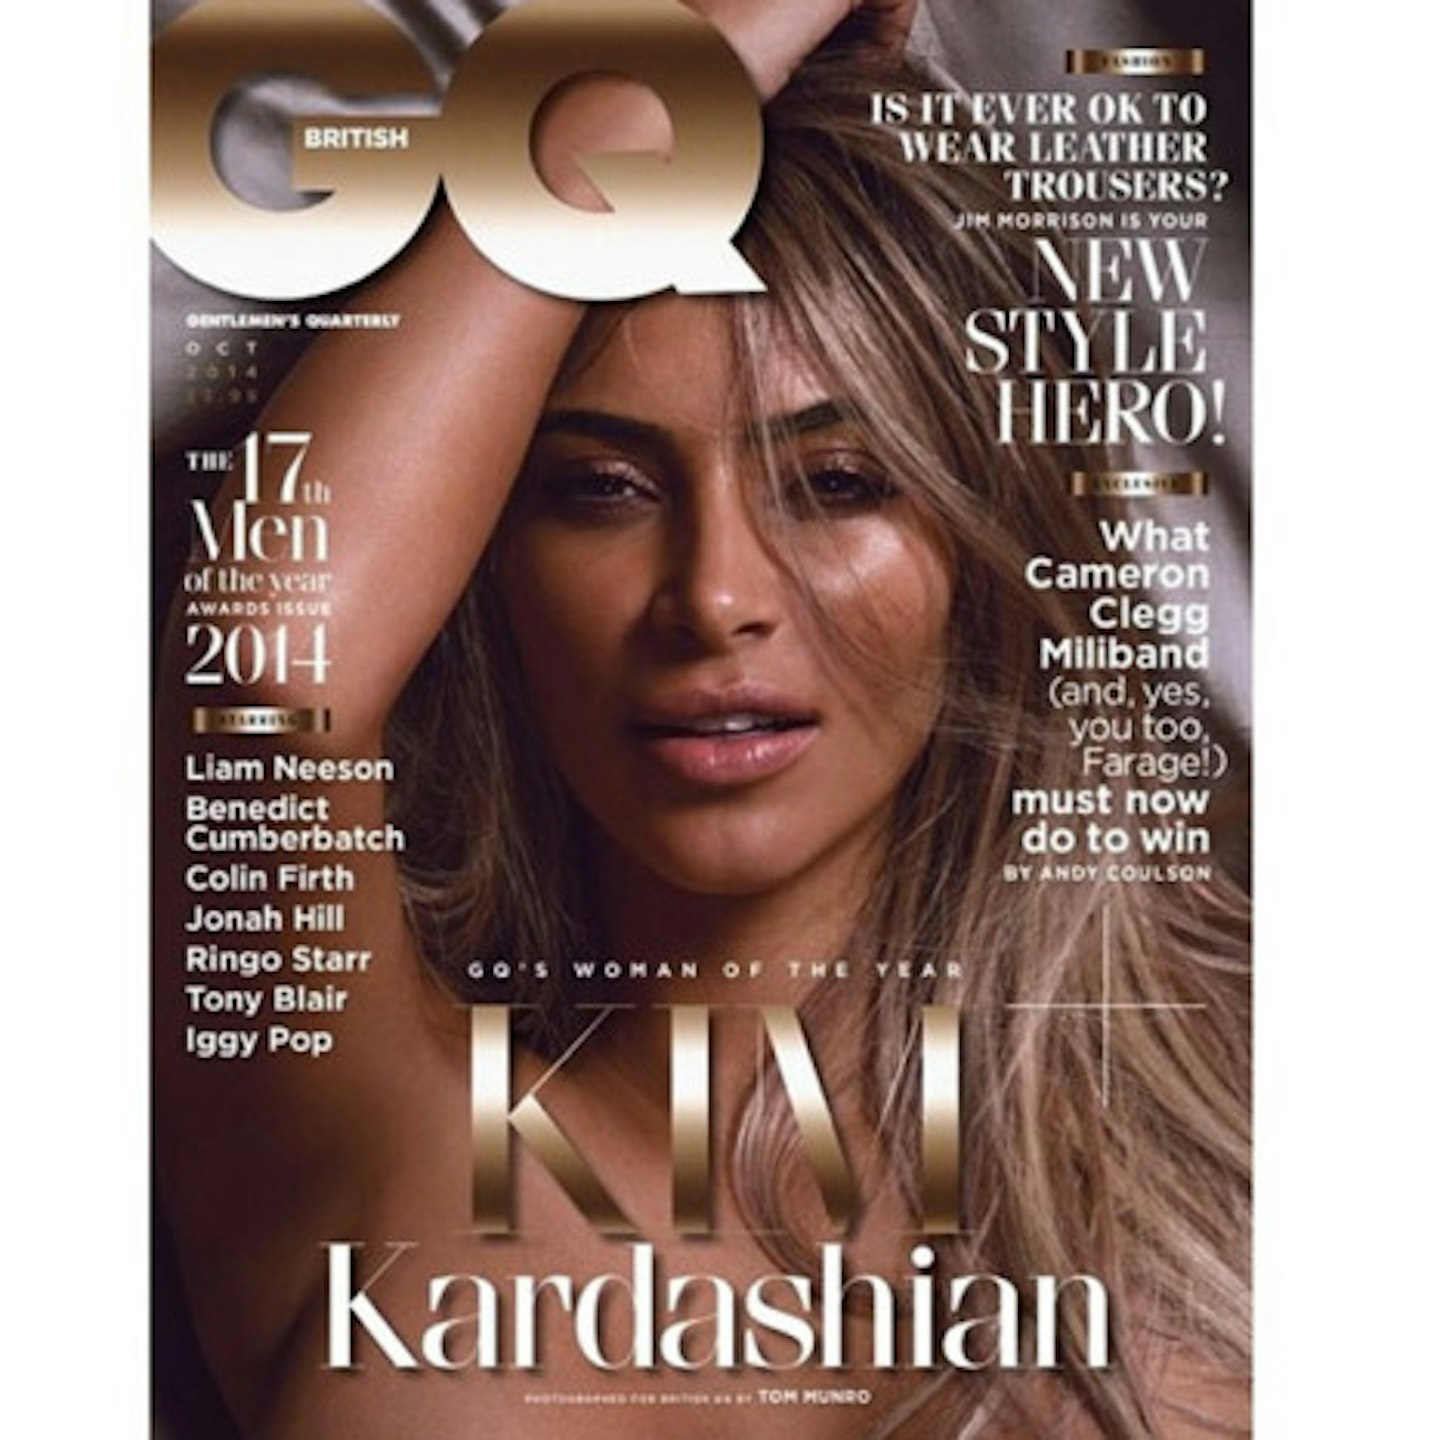 Kim posted her GQ cover on Instagram